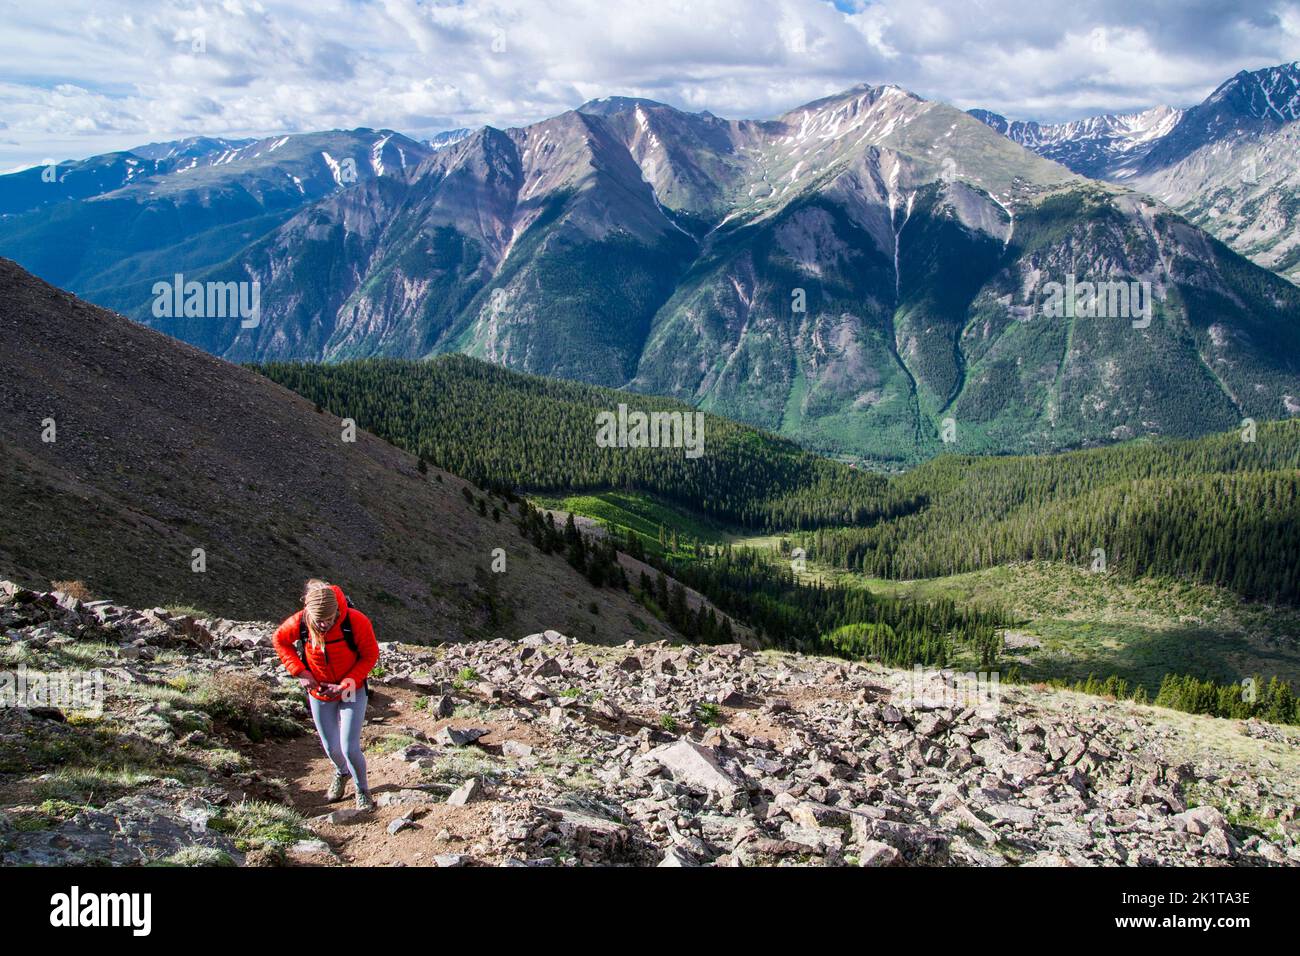 A woman climbs the steep walking trail on rocky ground with spectacular mountain views behind on Mt Elbert in Colorado USA Stock Photo